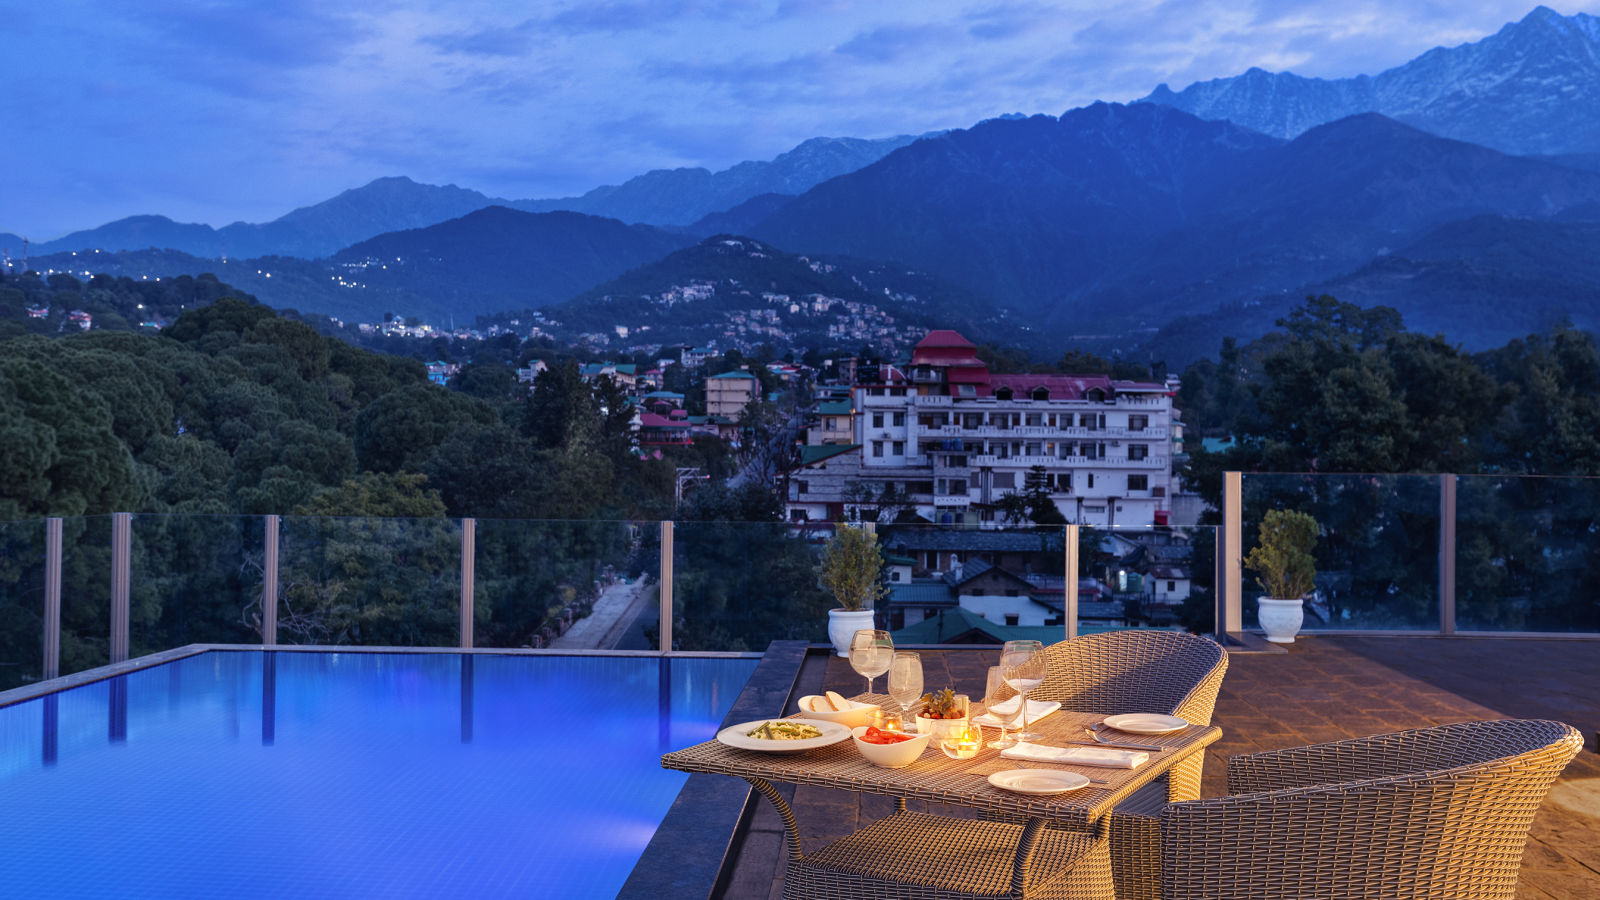 Rooftop pool lined with dining set up on the side on a clear blue day with mountains in the backdrop